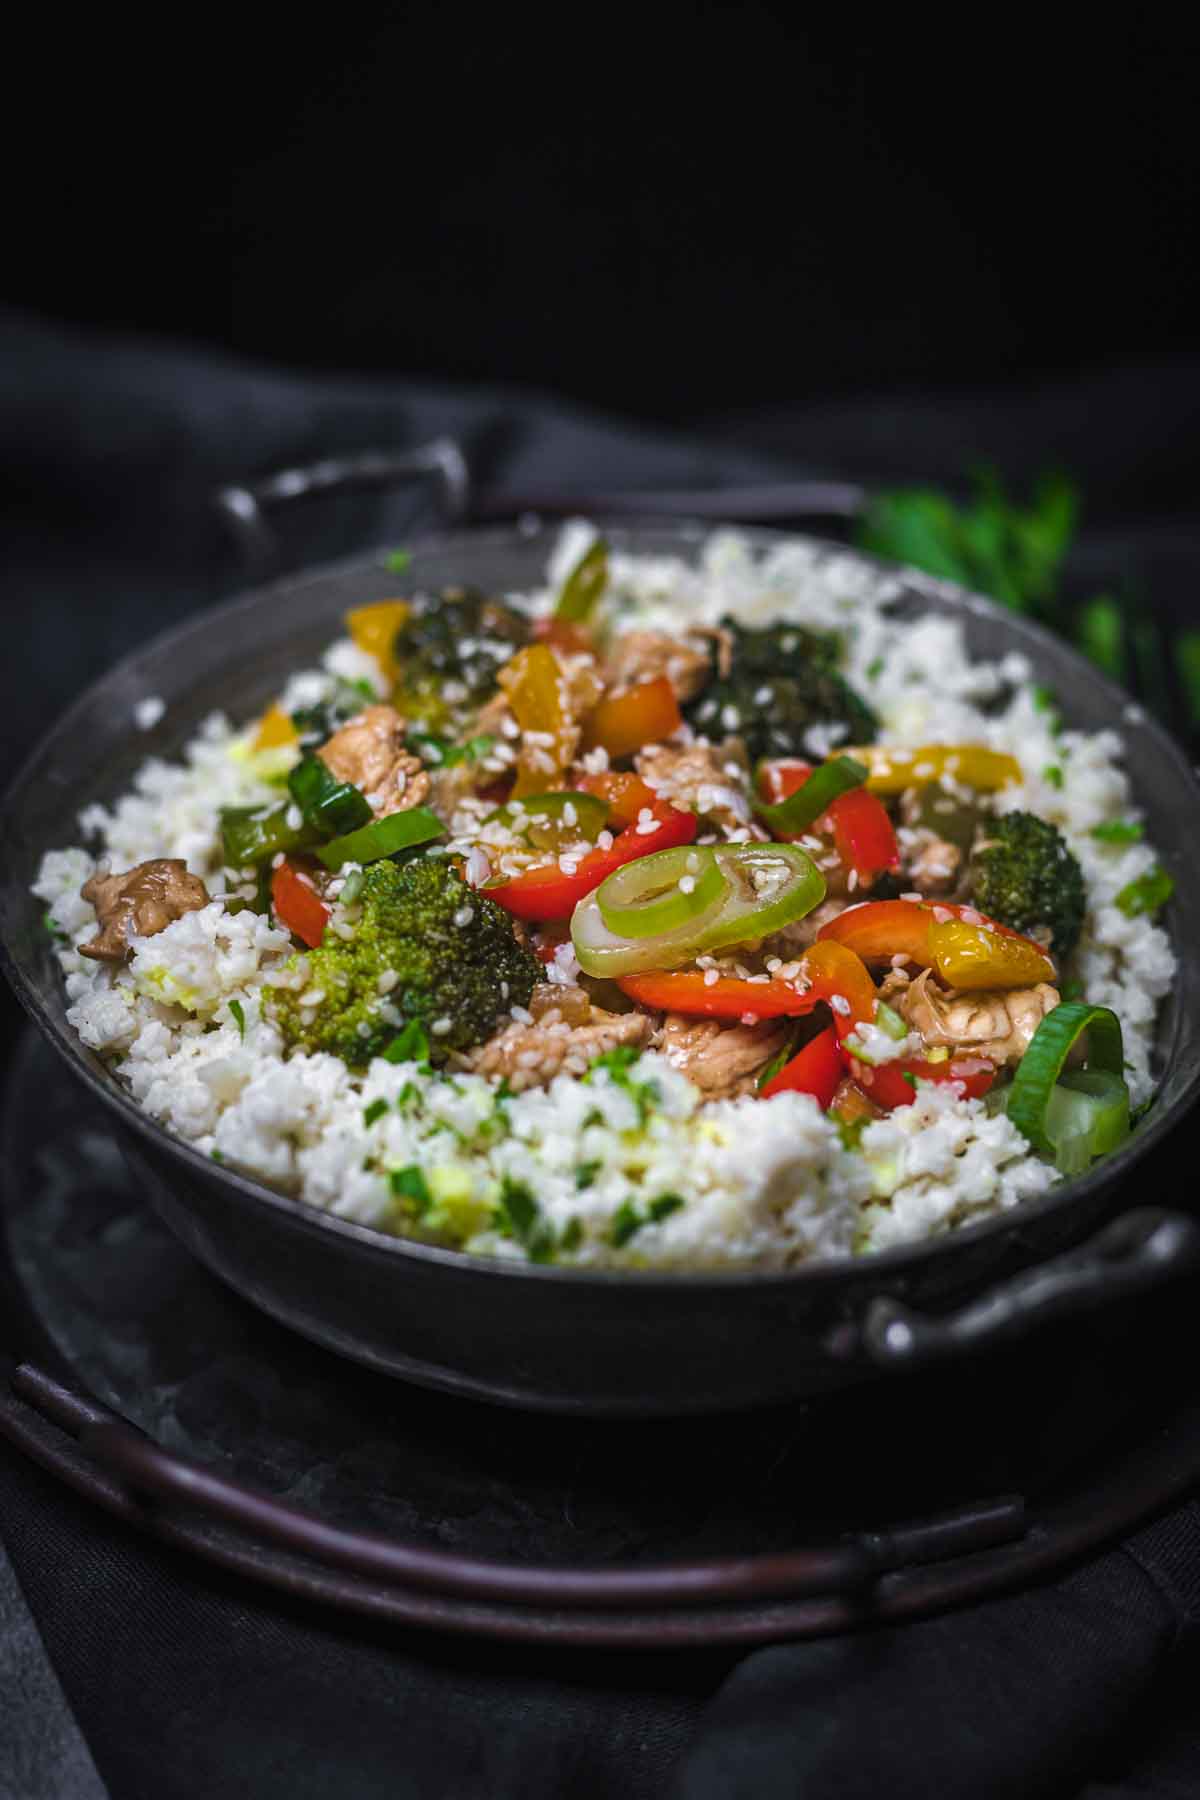 A skillet filled with rice and vegetables.